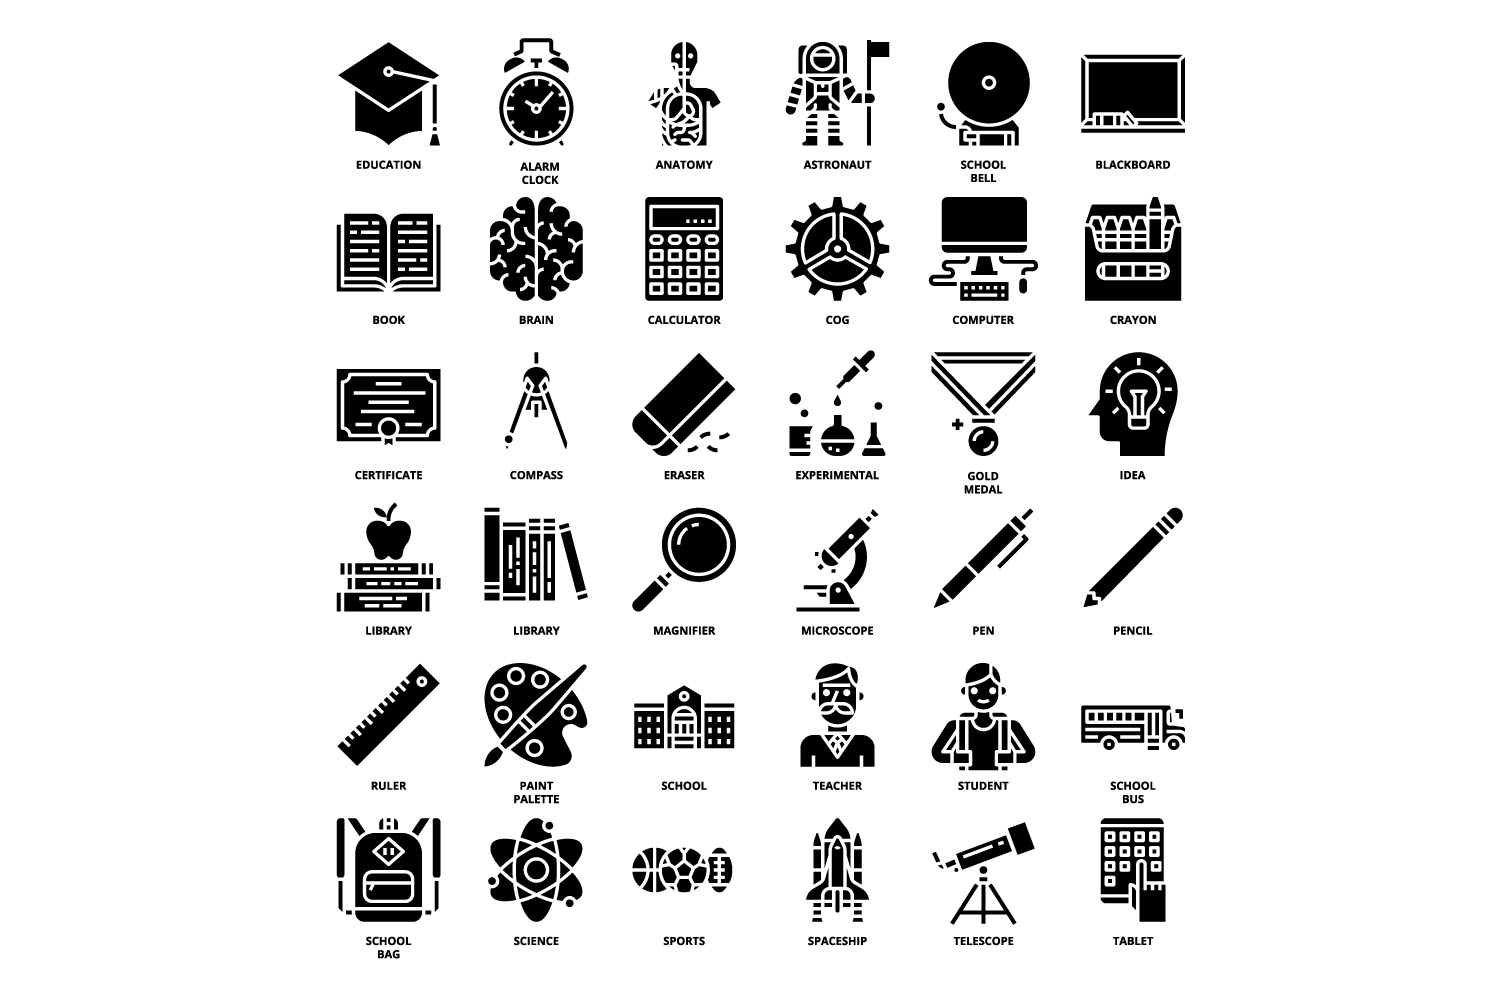 Set of black and white icons on a white background.